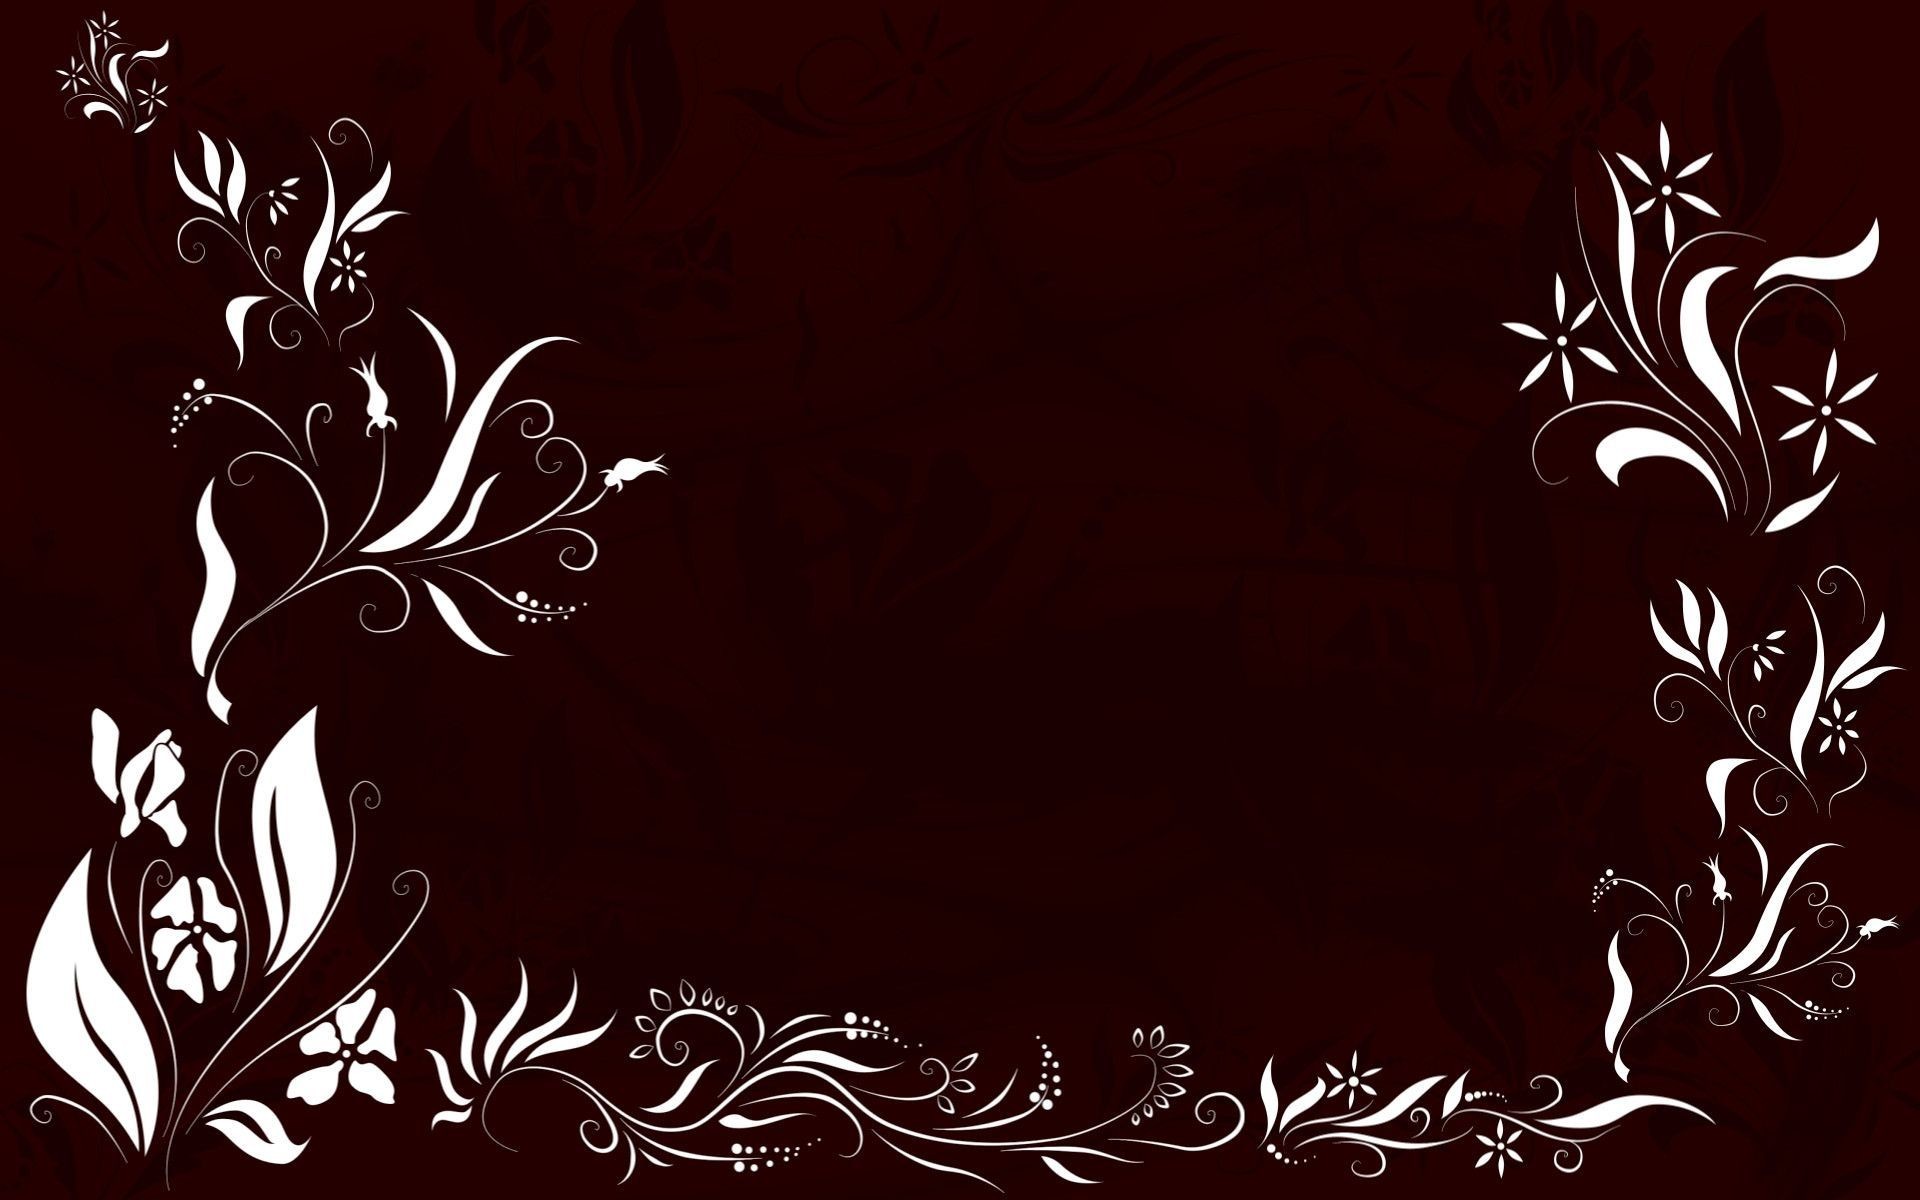 1920x1200 wallpaper.wiki-Backgrounds-Dark-Floral-PIC-WPB0010724